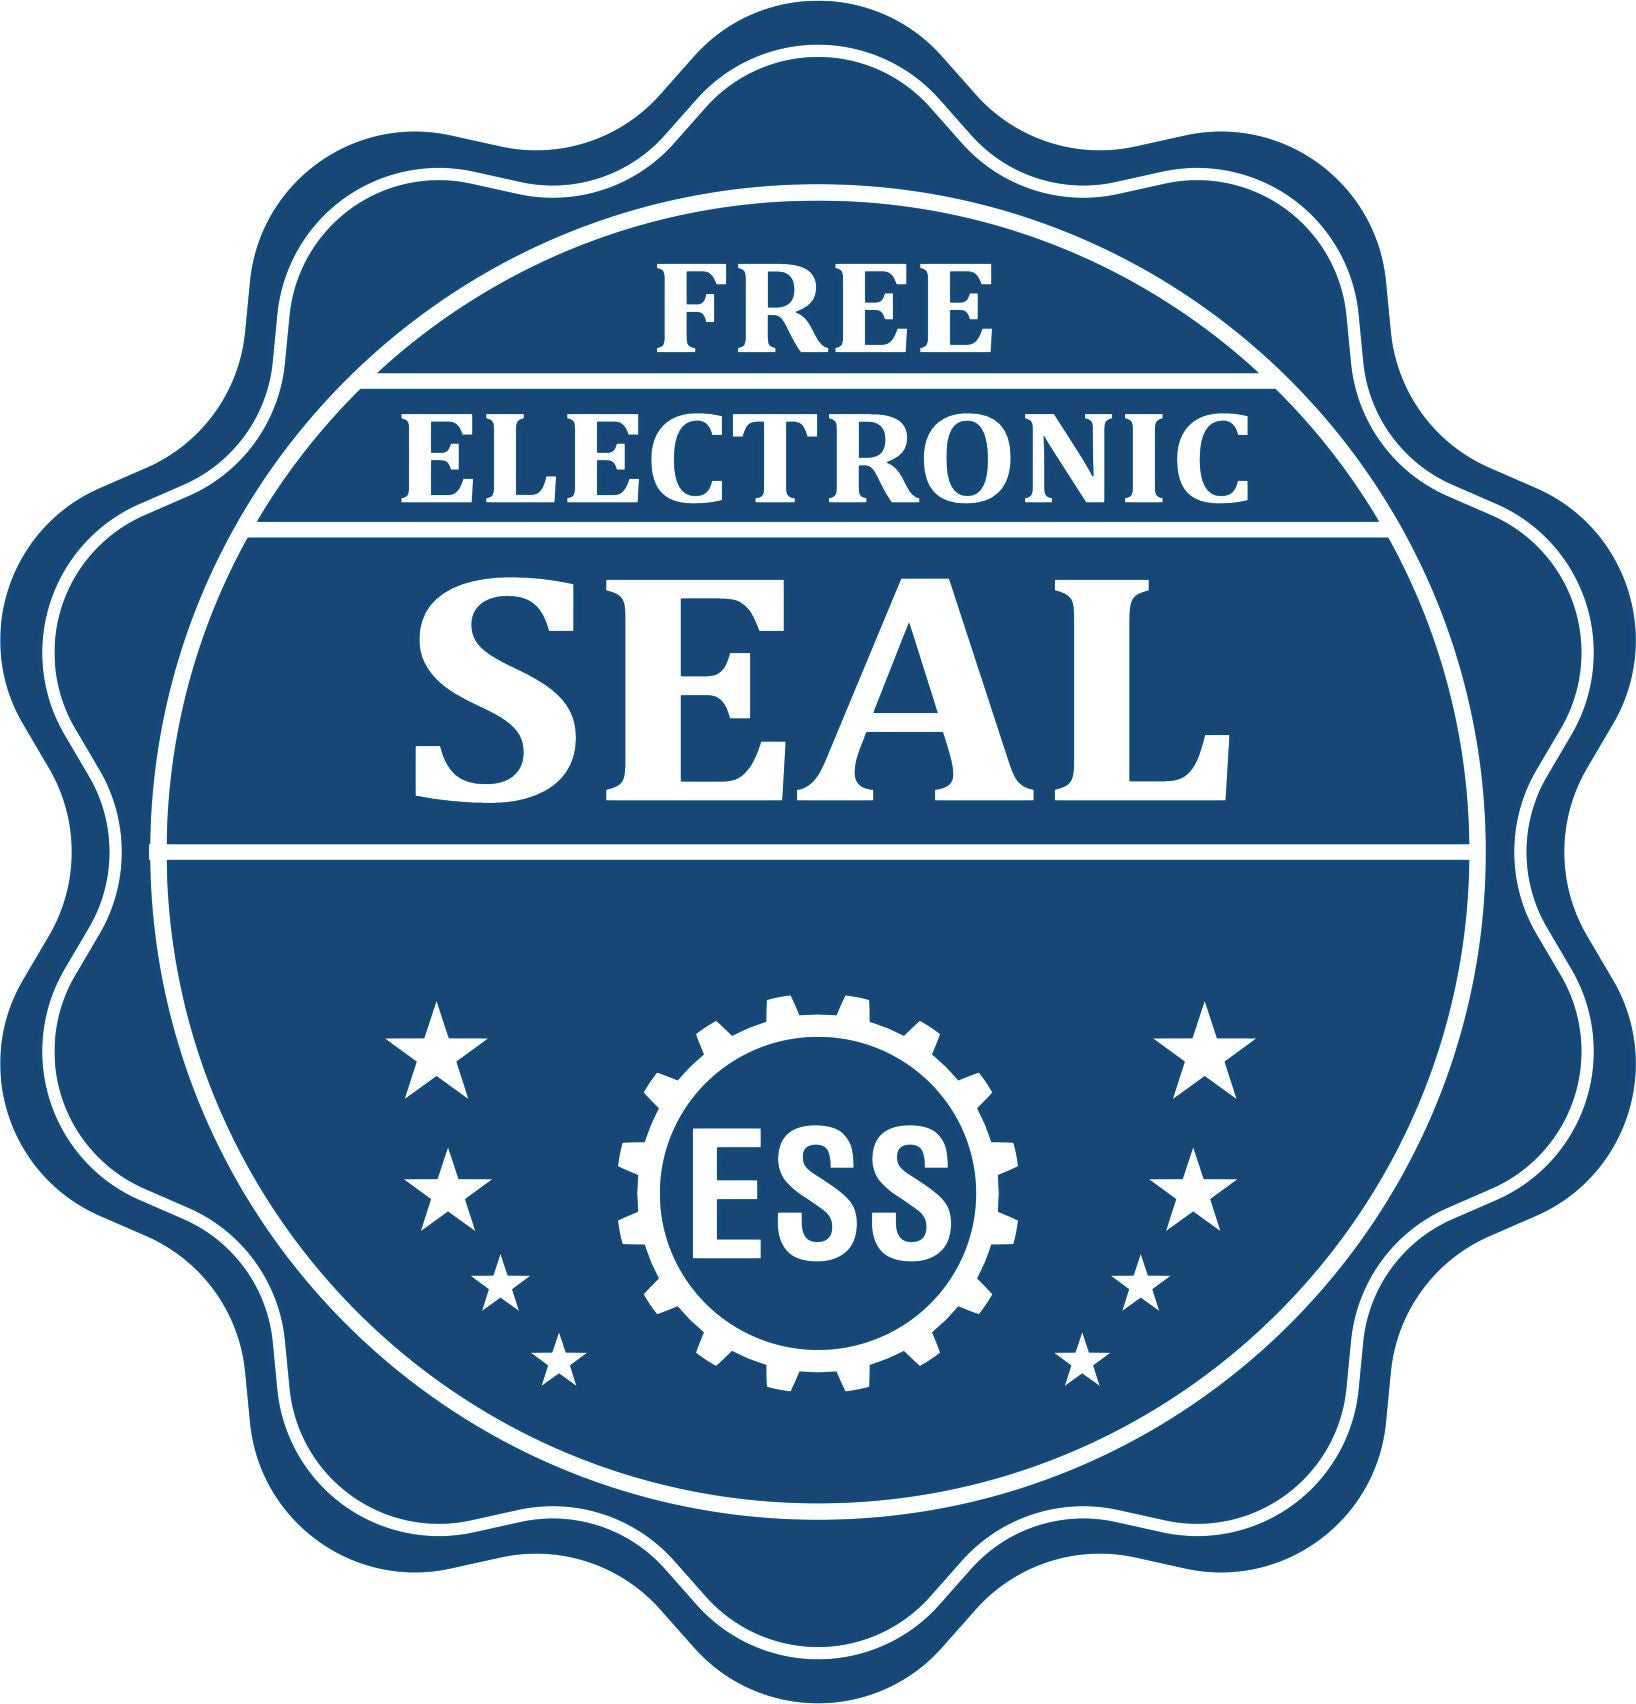 A badge showing a free electronic seal for the Hybrid Idaho Geologist Seal with stars and the ESS gear on the emblem.